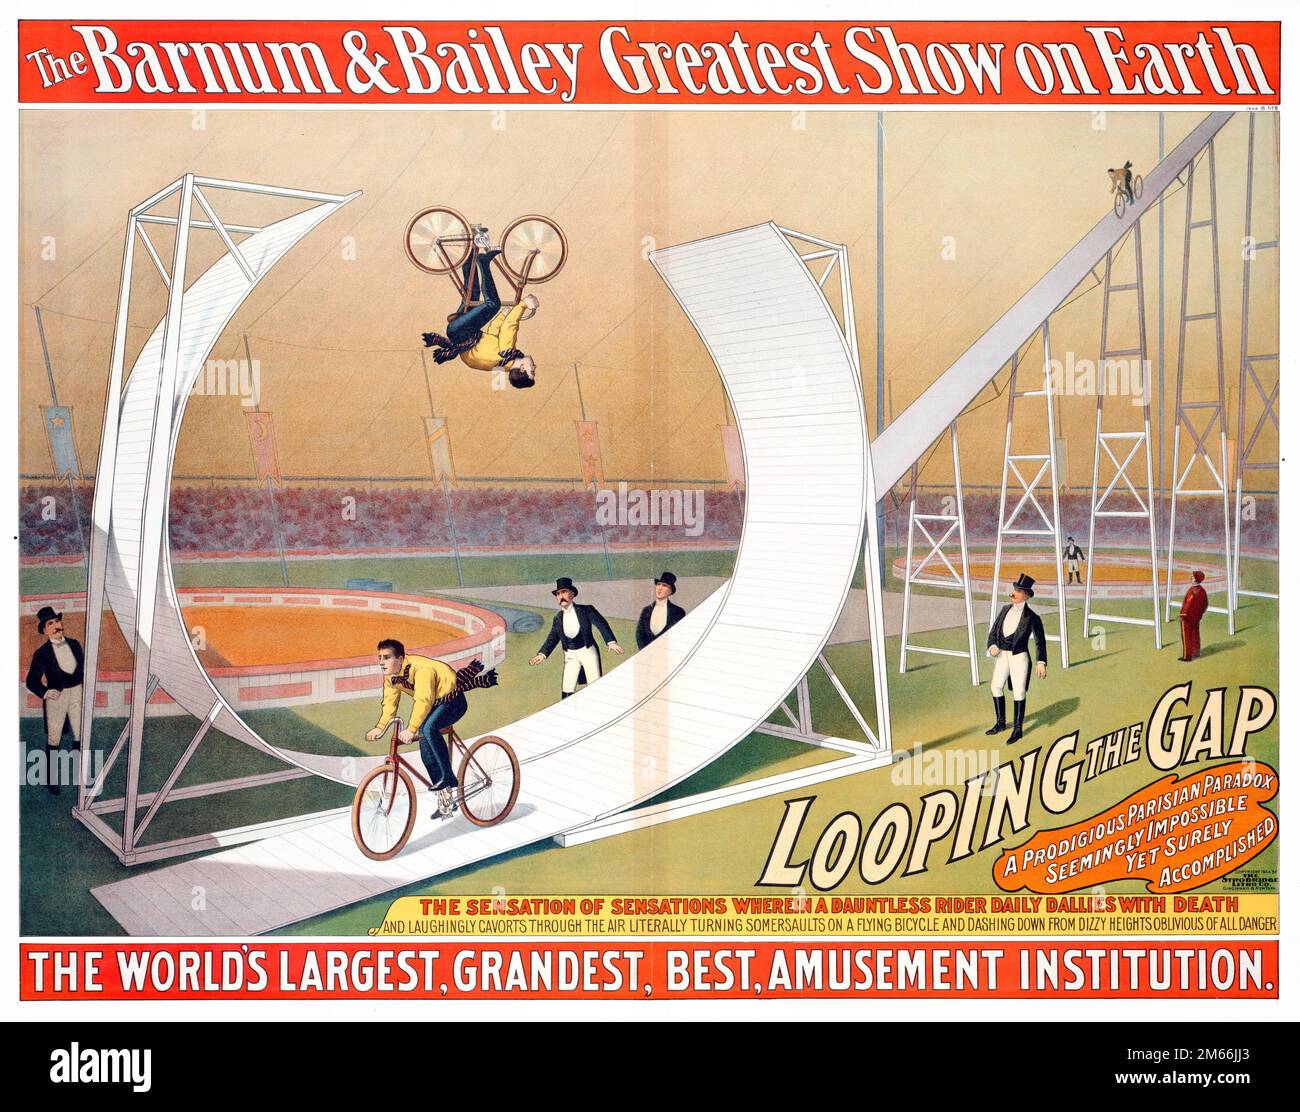 Barnum and Bailey Greatest Show on Earth - Circus - Fahrradshow - Looping the Gap - Zirkusposter. 1904. Stockfoto